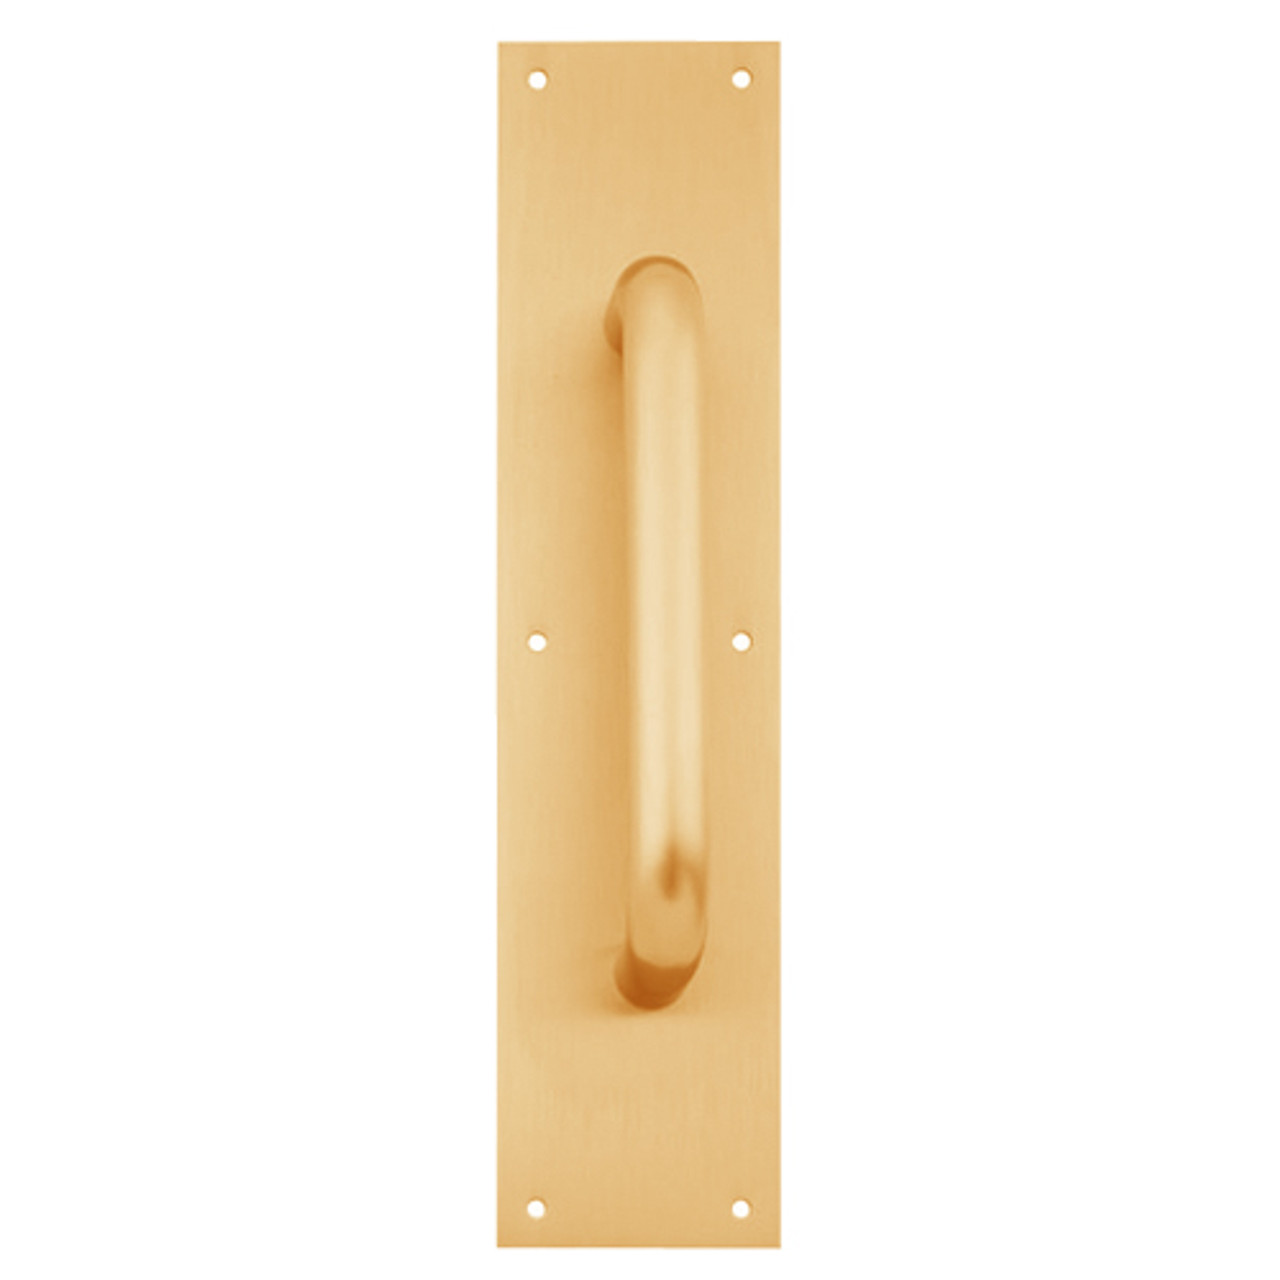 8303-10-US10-6x16 IVES Architectural Door Trim 6x16 Inch Pull Plate in Satin Bronze